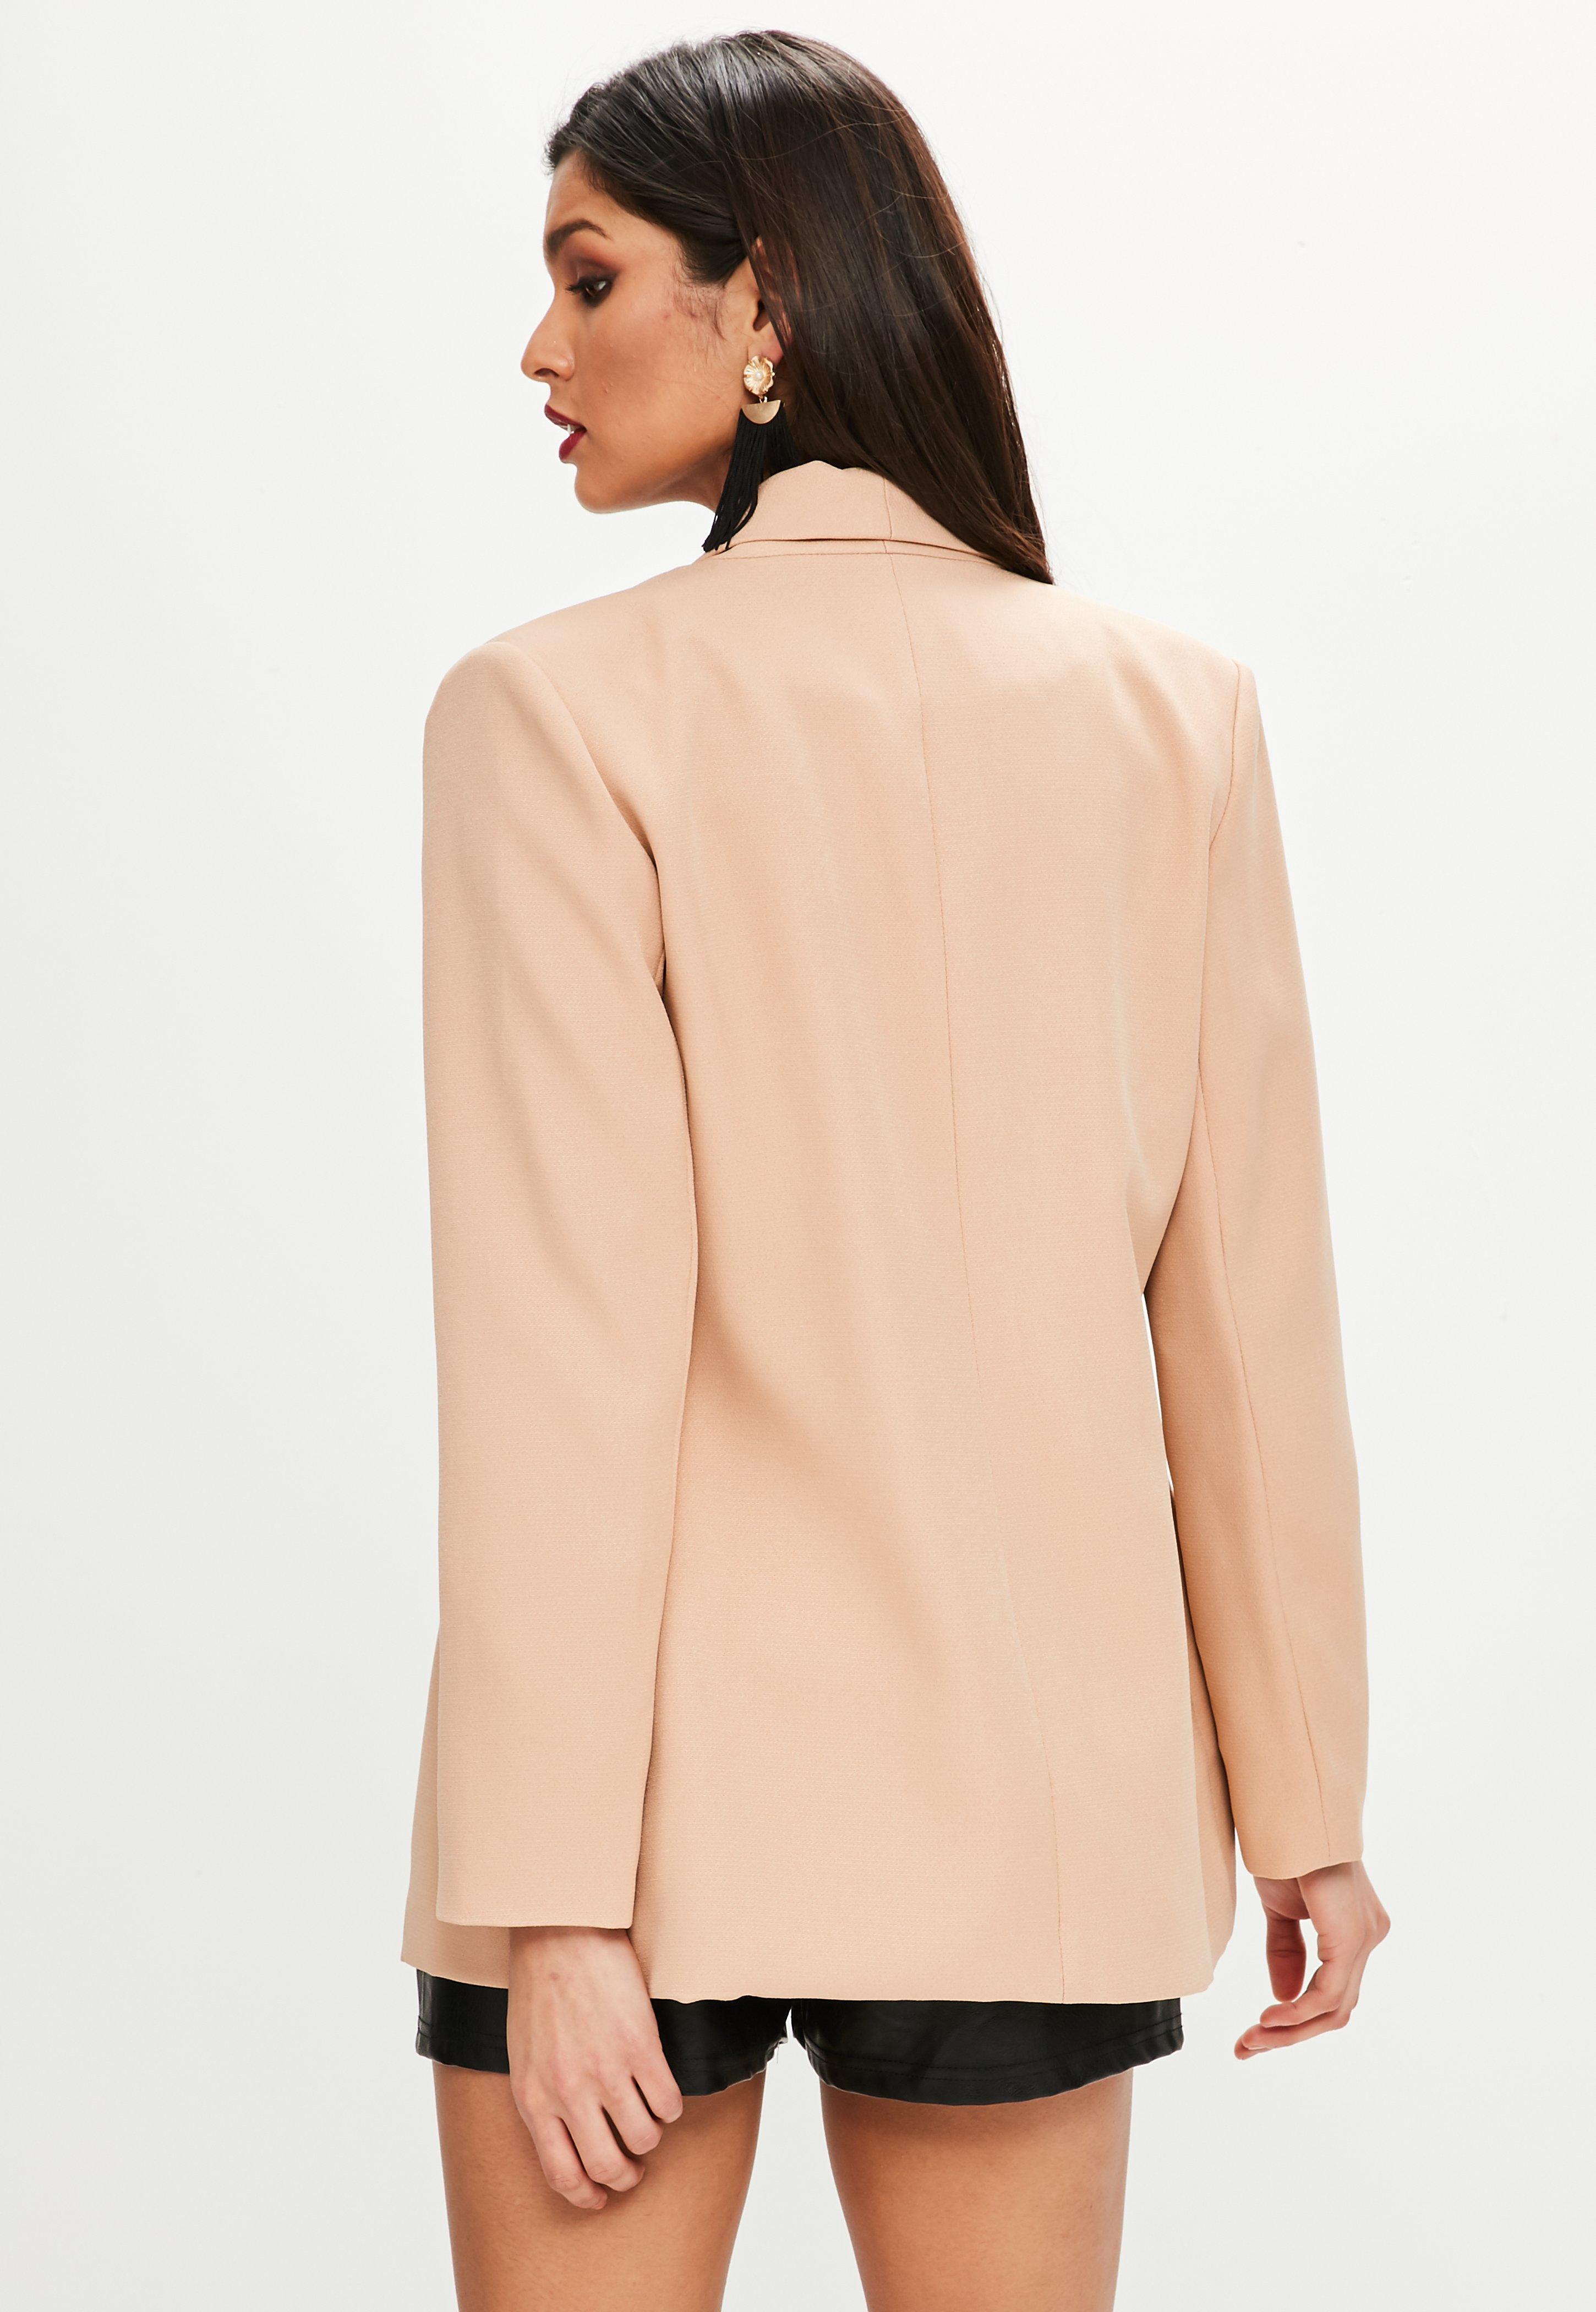 Missguided Synthetic Nude Boyfriend Blazer in Natural - Lyst